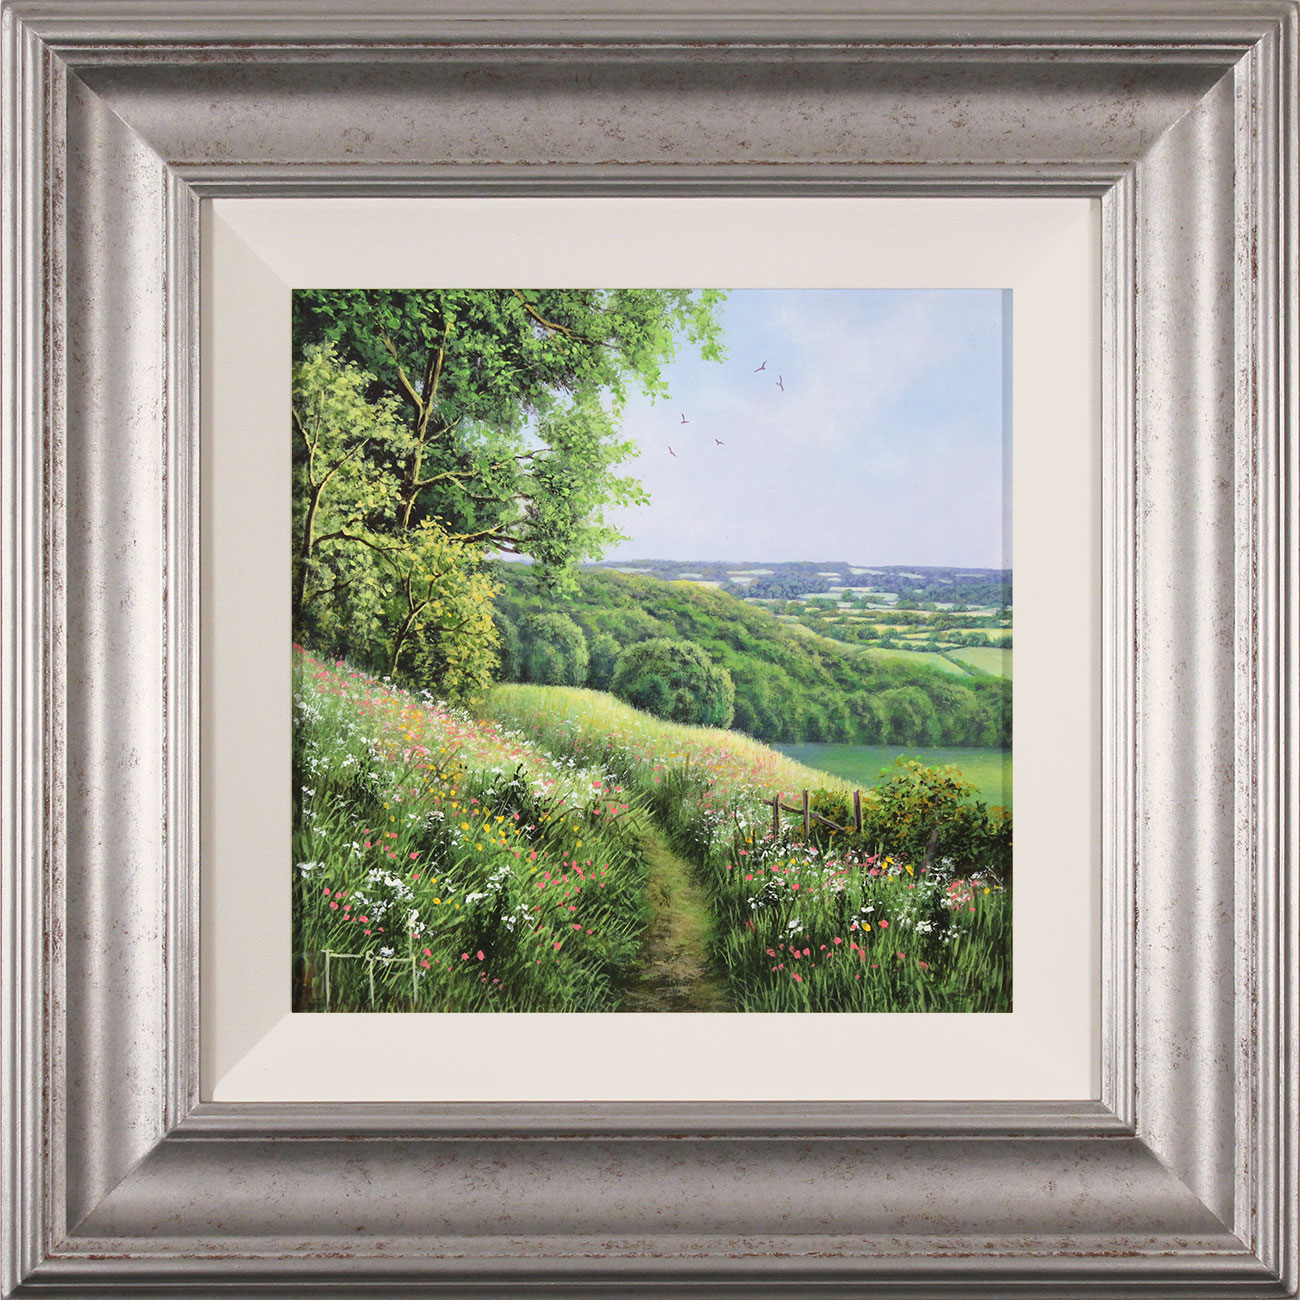 Terry Grundy, Original oil painting on panel, Summer in the Yorkshire Wolds Click to enlarge